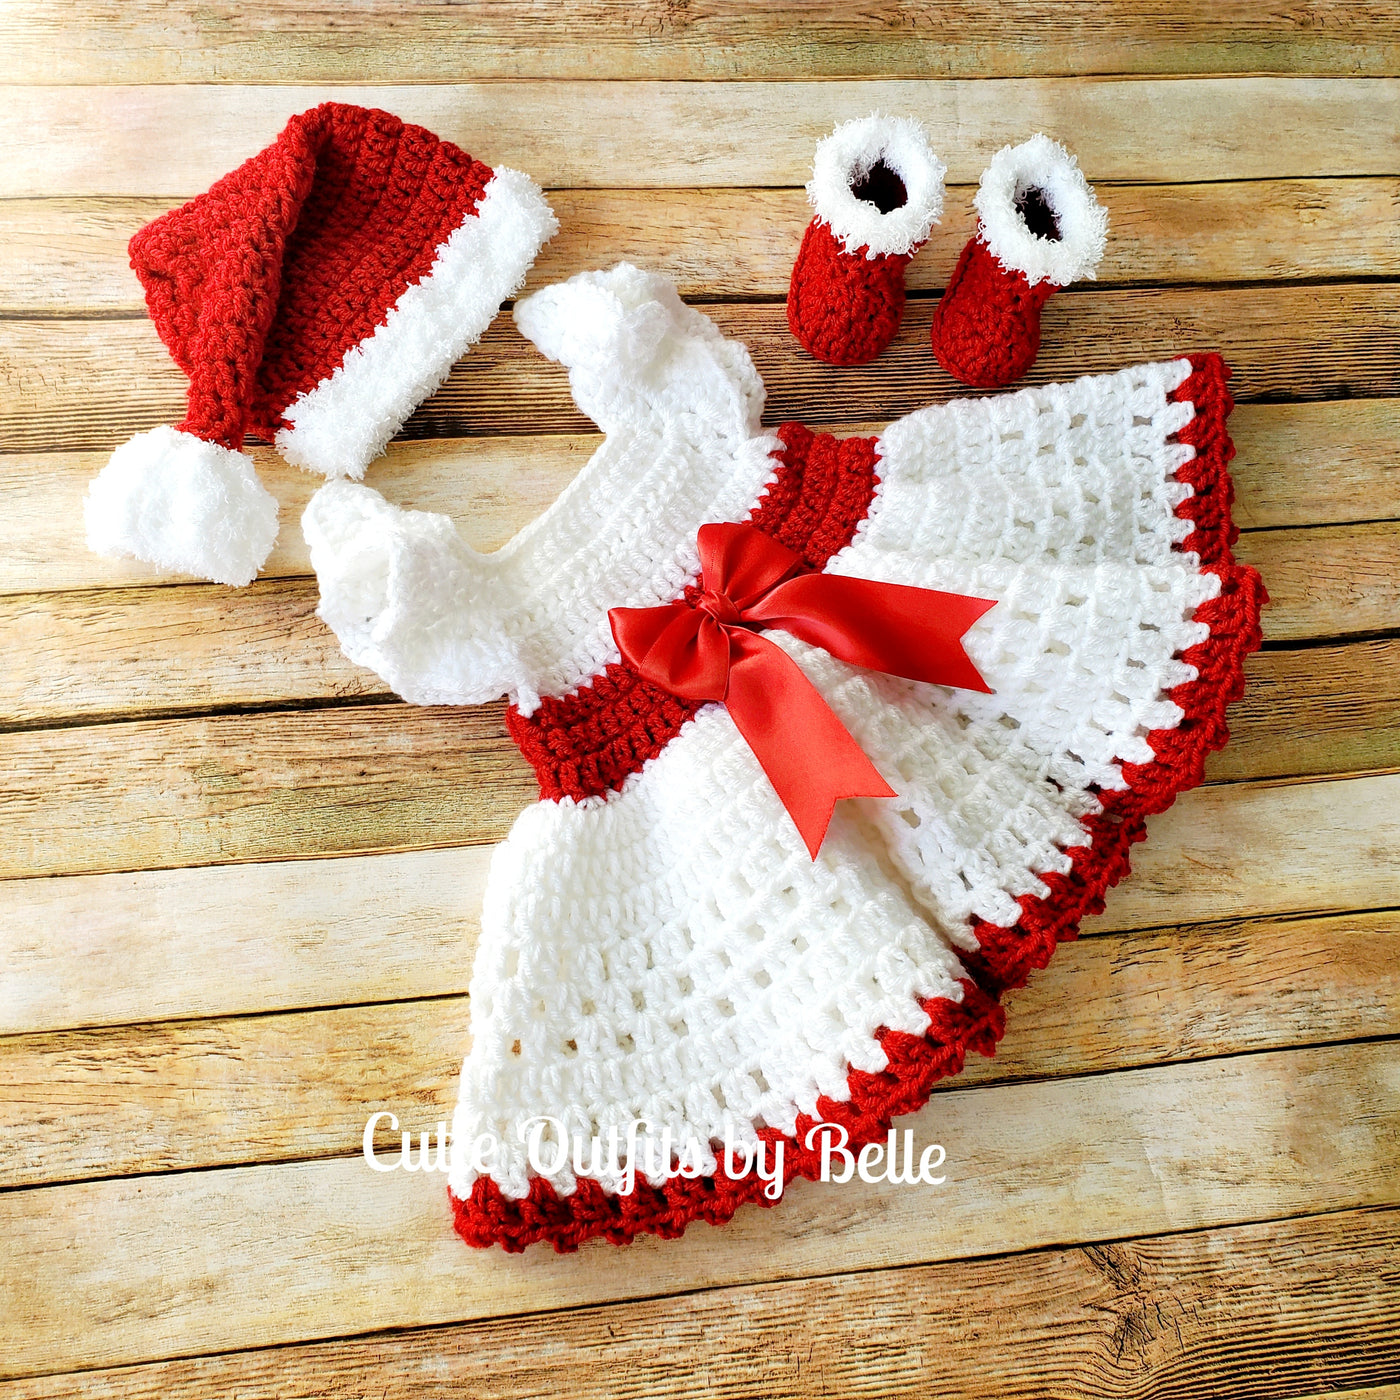 Red Crochet Baby Outfit, Take Home Baby Outfit, Coming Home Dress, Infant Outfits, Crochet Newborn Outfit, Photo Prop Outfit, Infant Christmas